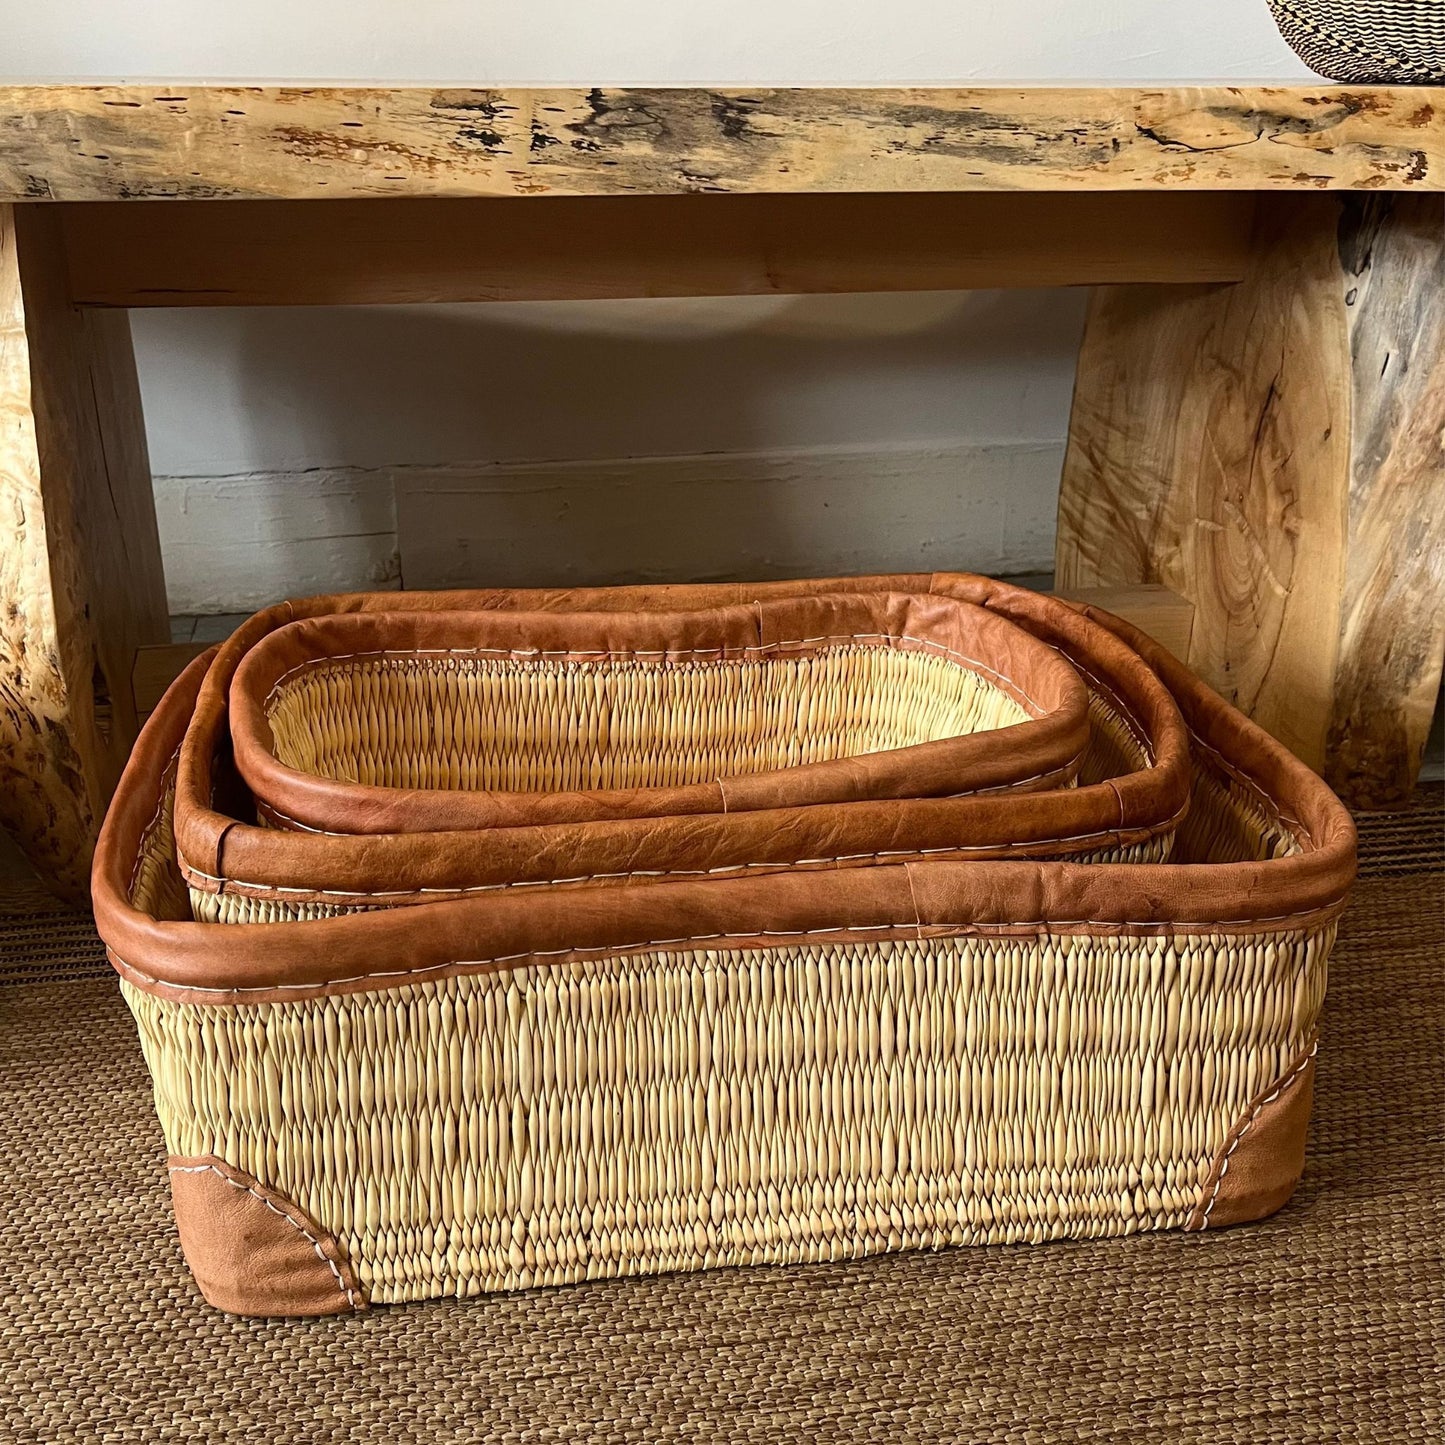 Nested set of woven palm and leather-trimmed rectangular storage baskets